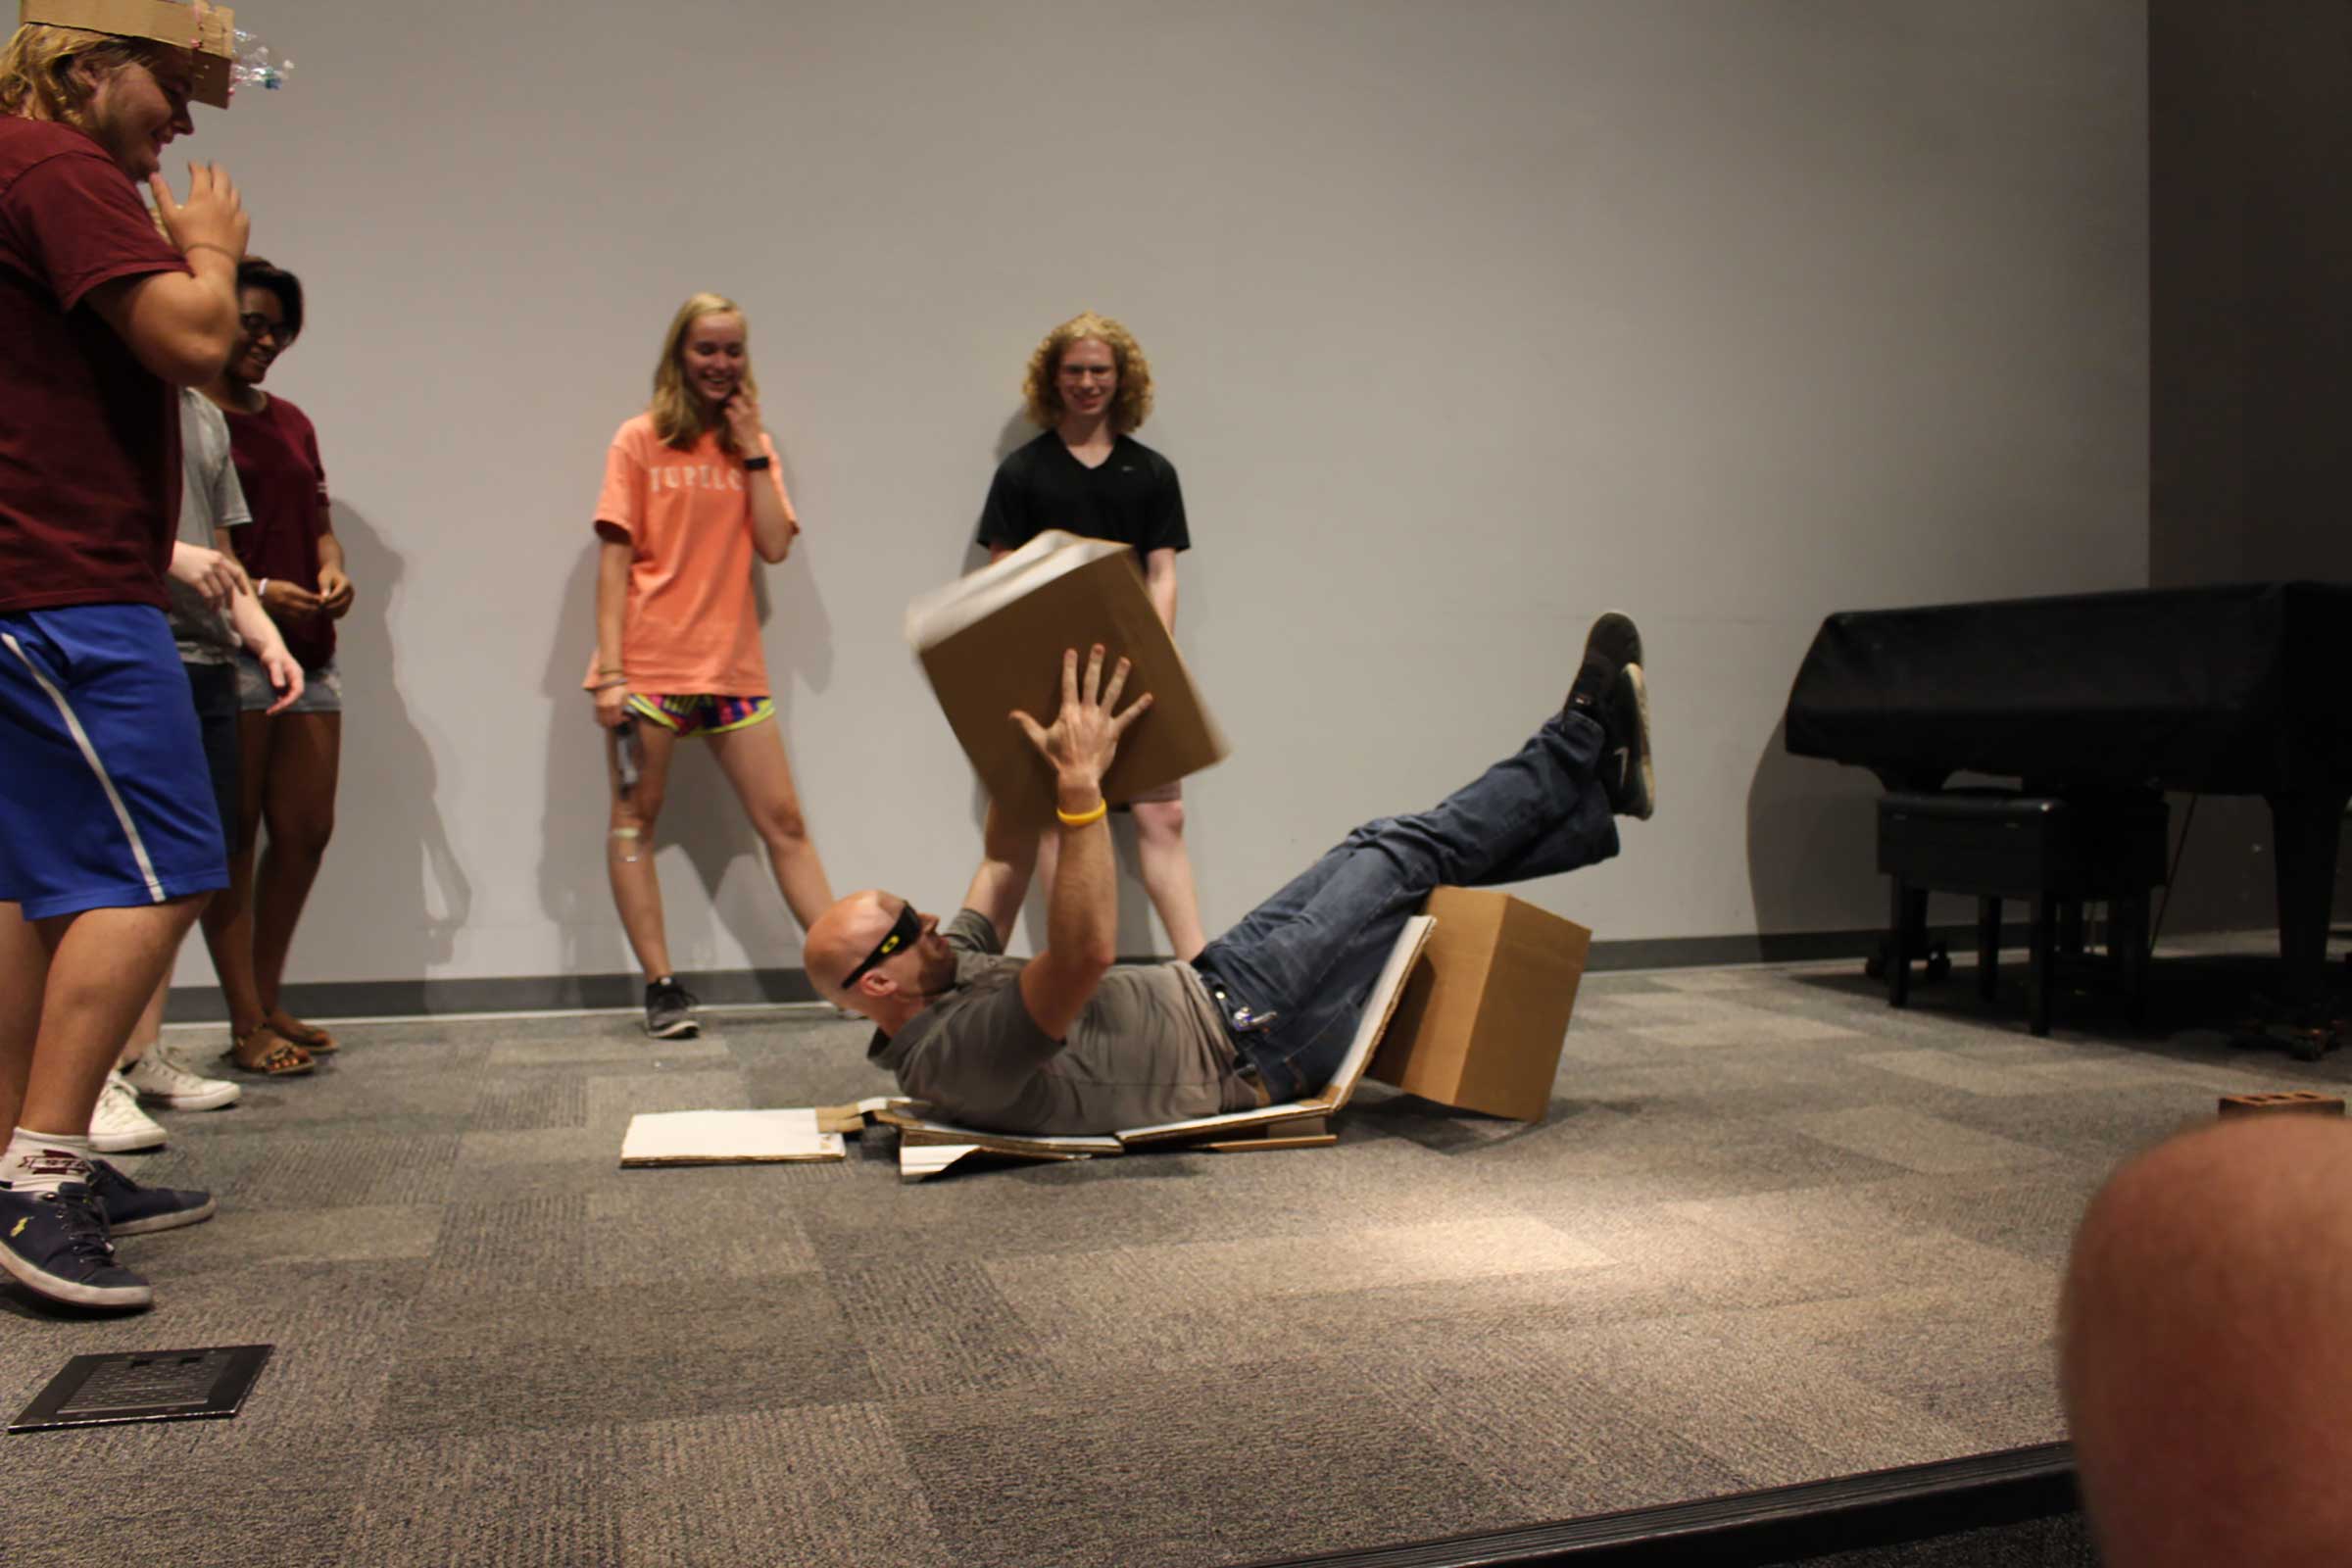 Day 4: Cardboard Sitting Device – Review 15